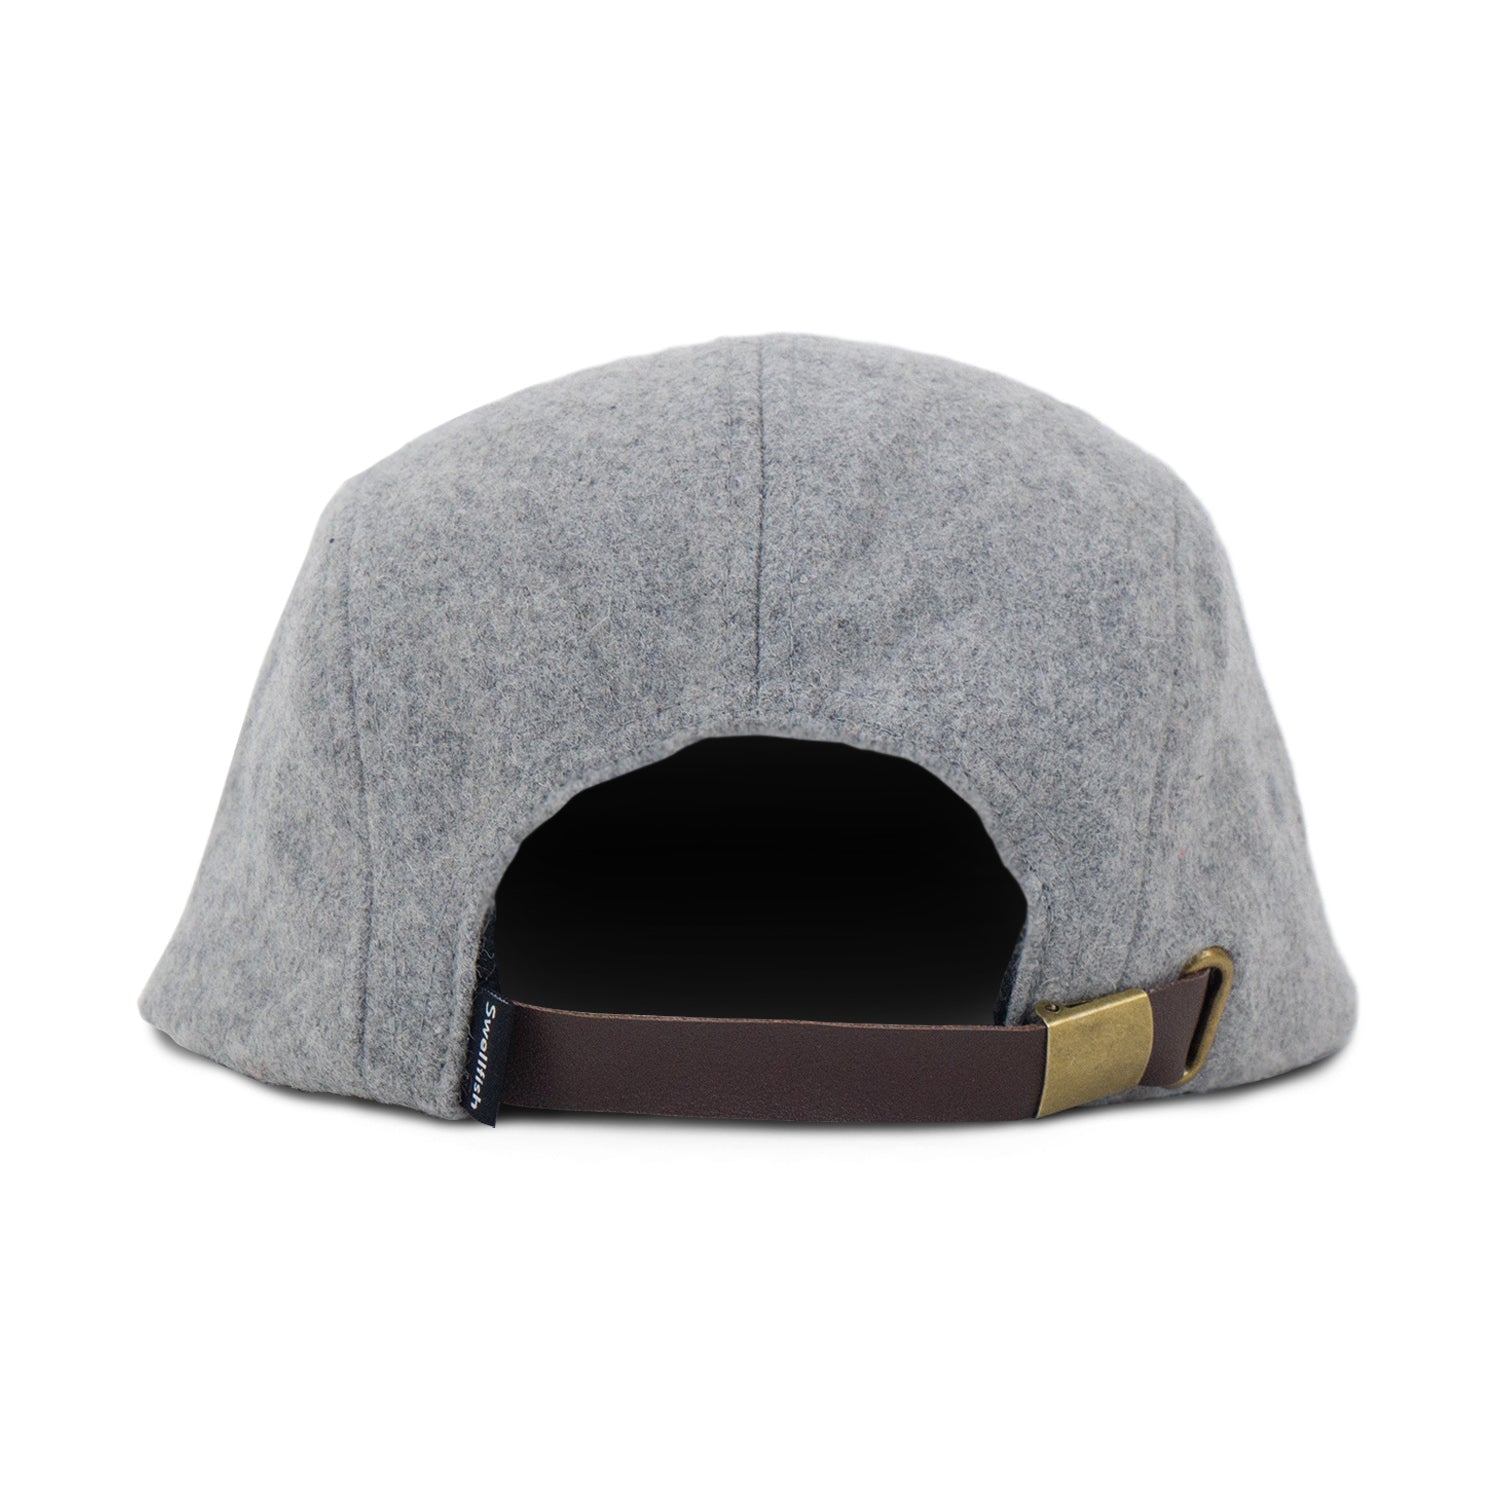 Felted Wool 5 Panel Campers Hat - Swellfish Outdoor Equipment Co.